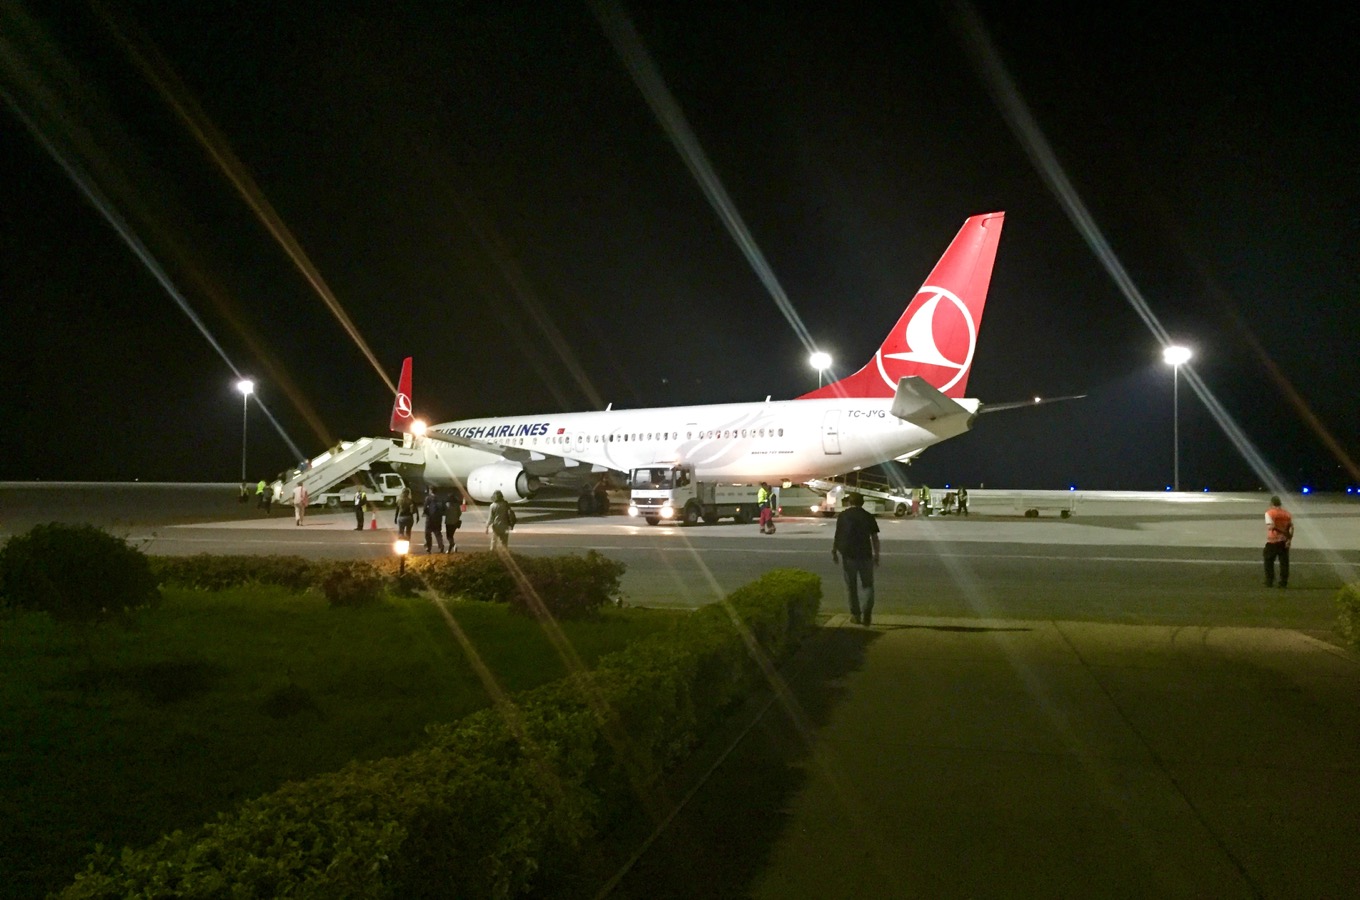 Departure from Kilimanjaro International Airport with Turkish Airlines